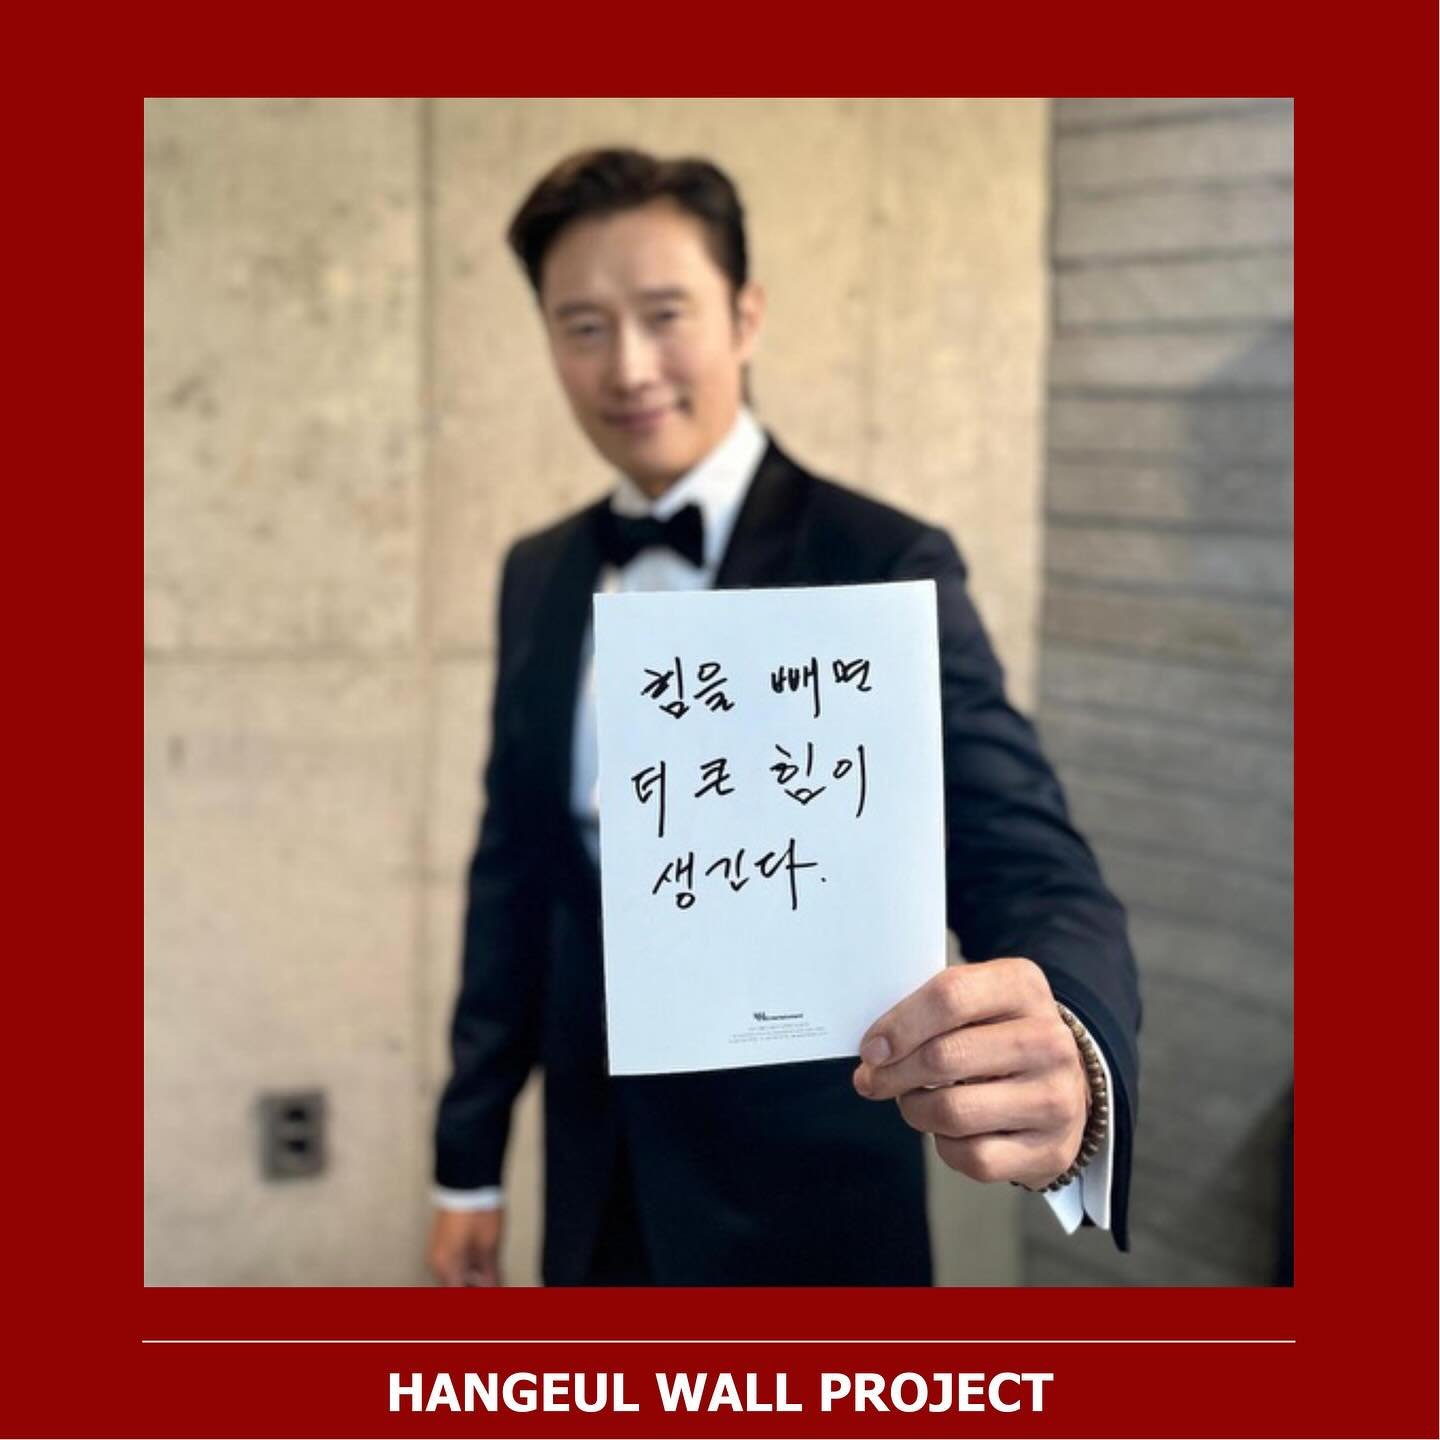 Renowned Korean actor Lee Byunghun (@byunghun0712 ) has joined our Hangeul Wall Project! His message reminds us that overcoming challenges not only strengthens us, but also leads to incredible personal growth. 🙏🏼

&ldquo;힘을 빼면 더 큰 힘이 생긴다&ldquo;
&ld